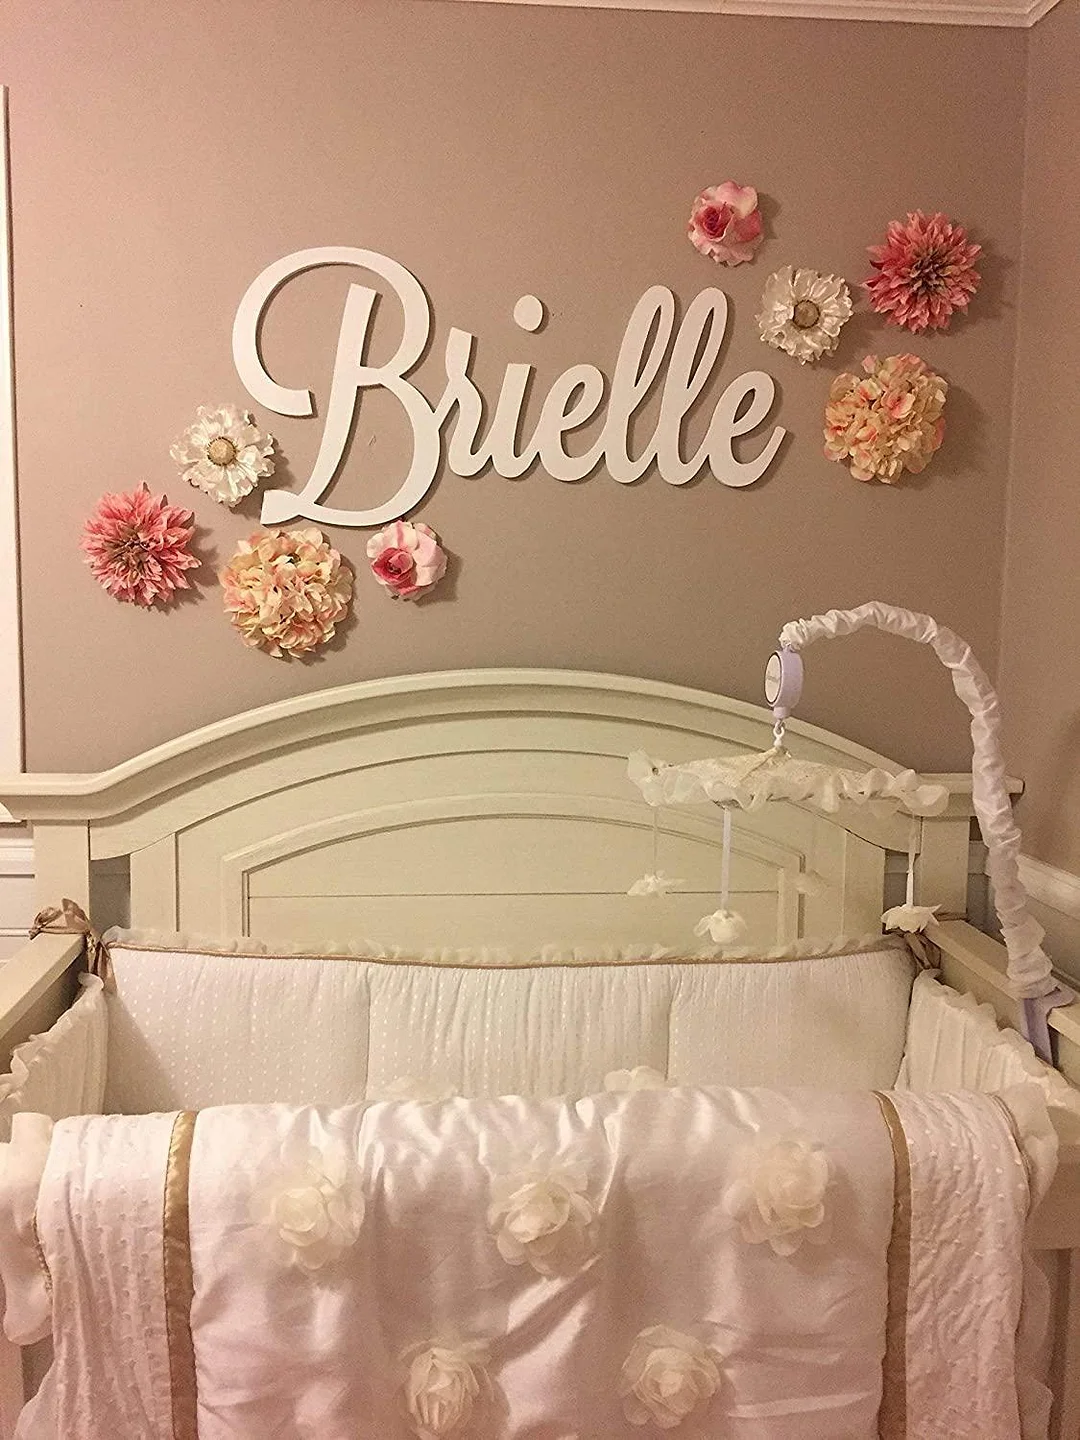 Personalized Wooden Name Sign Large size Letters Baby Name Plaque PAINTED nursery name nursery decor  wall art 1020-1